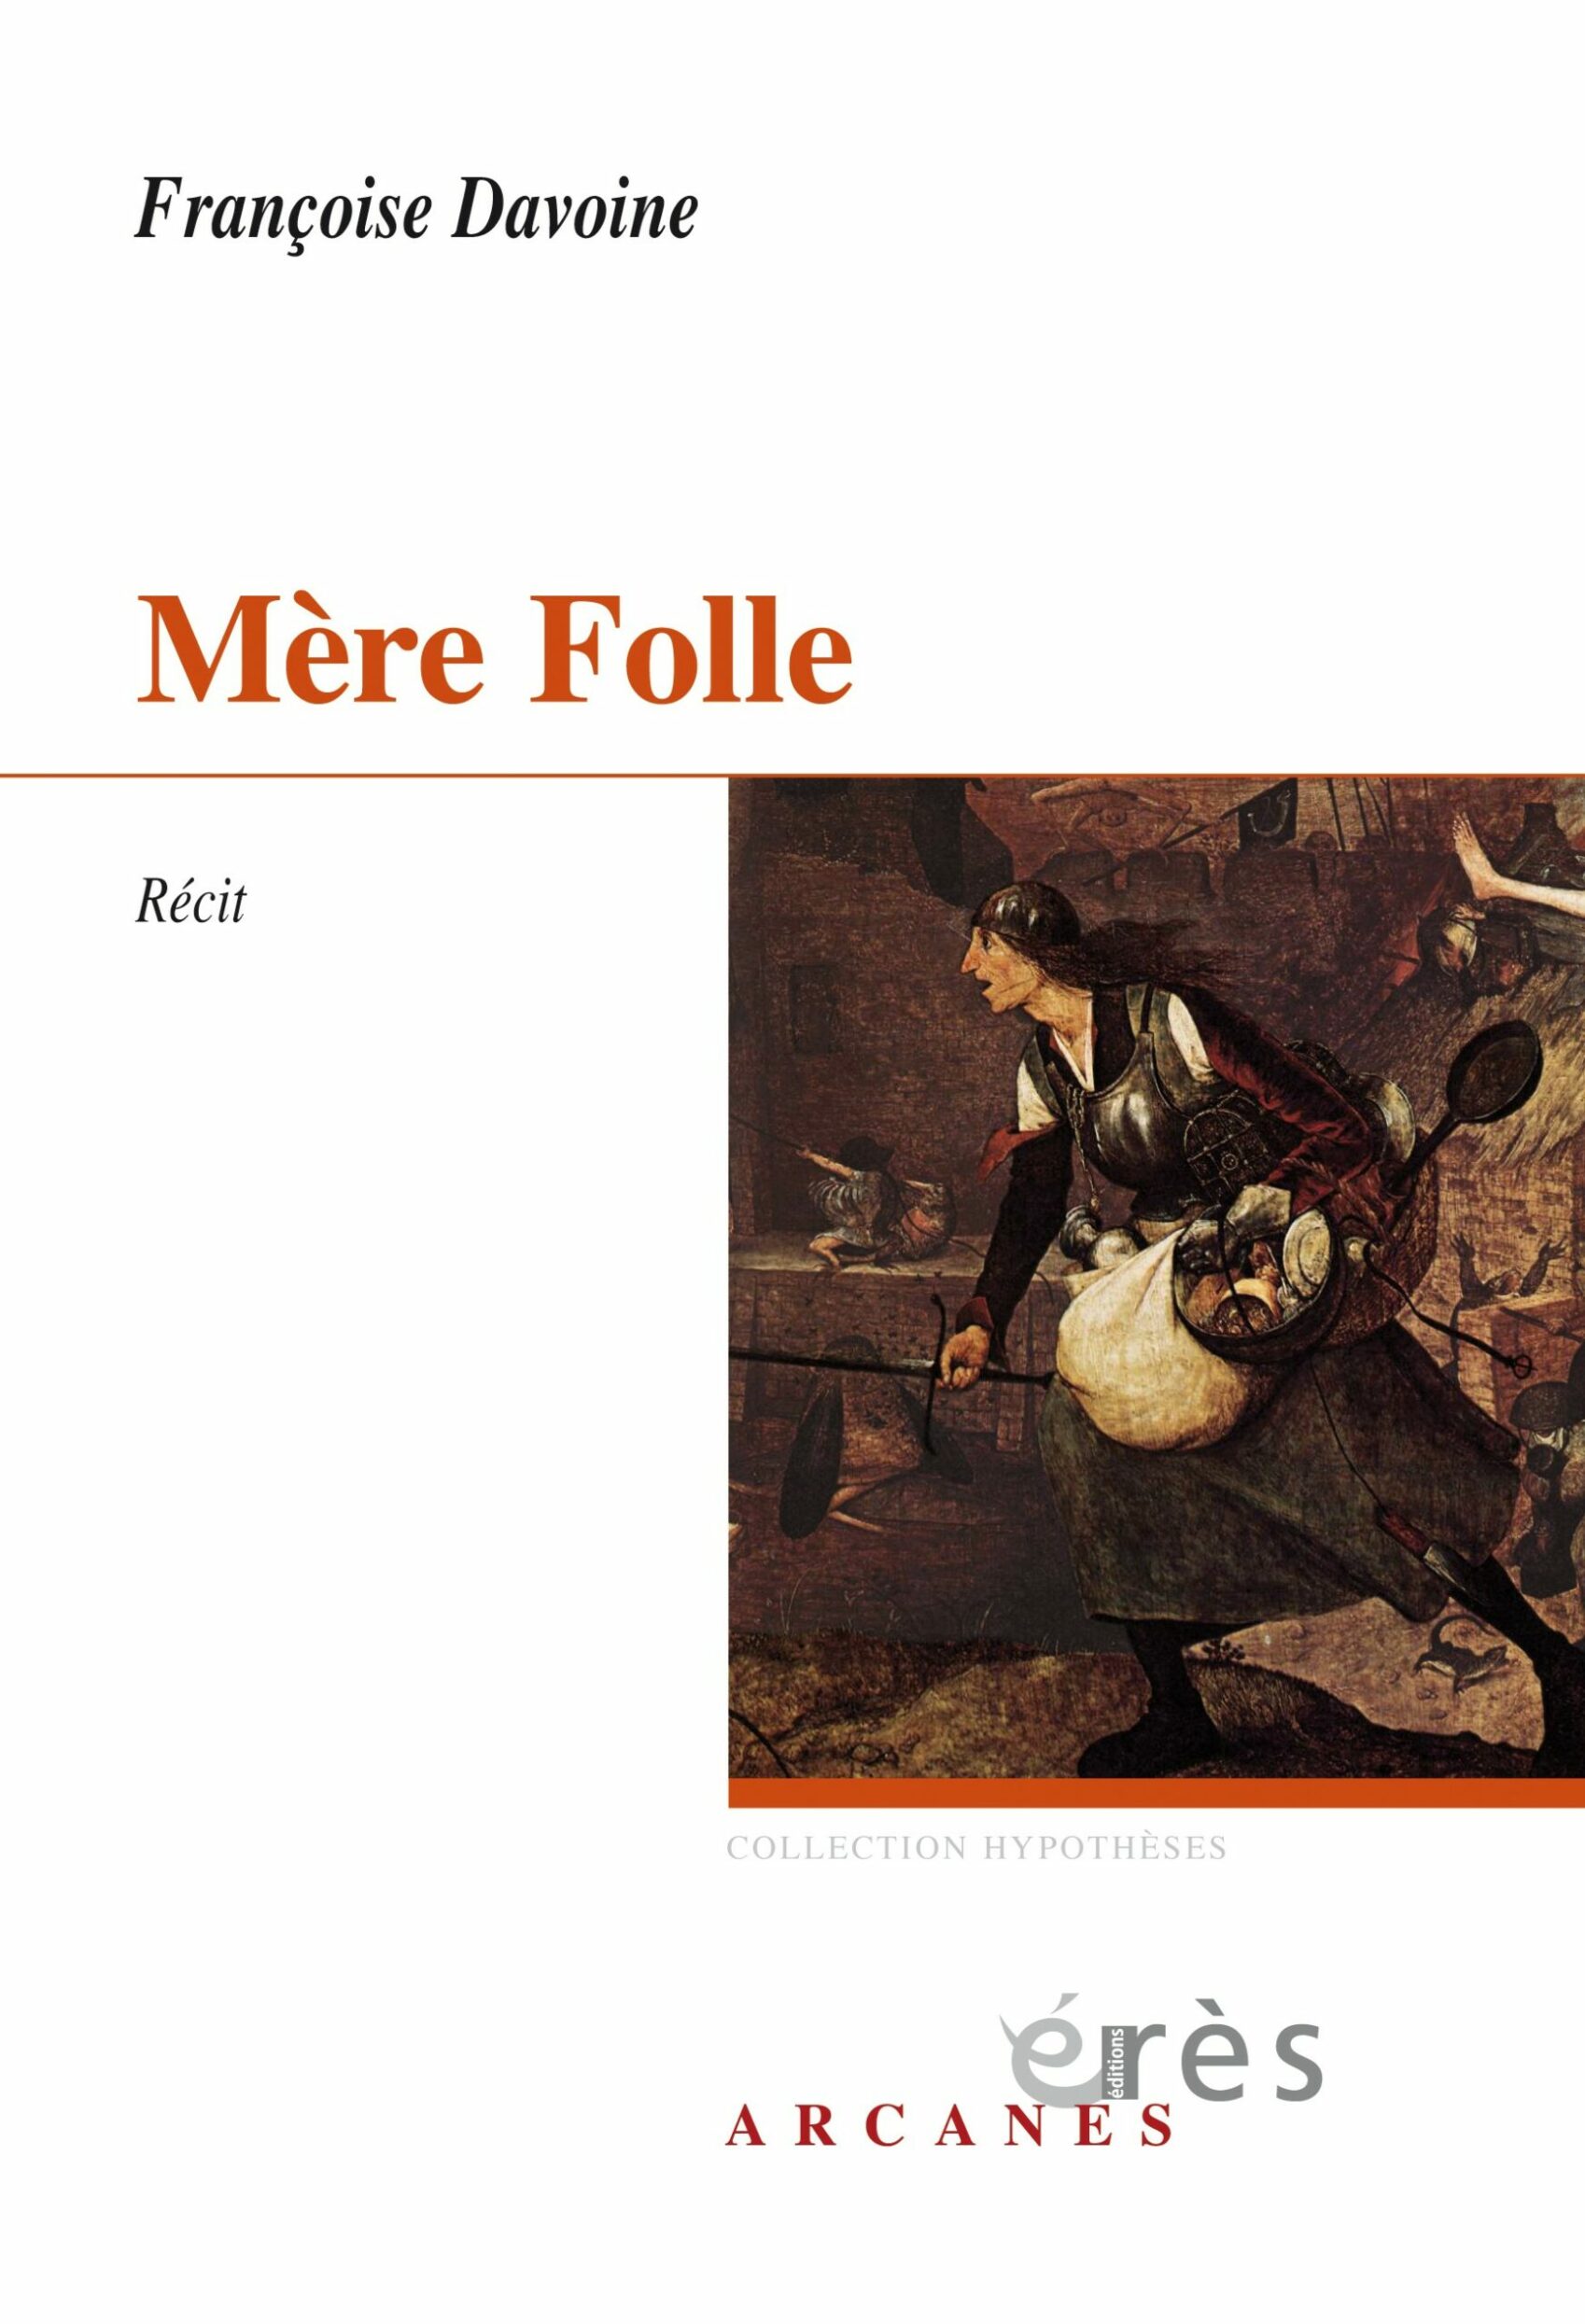 202304111812mere-folle-1